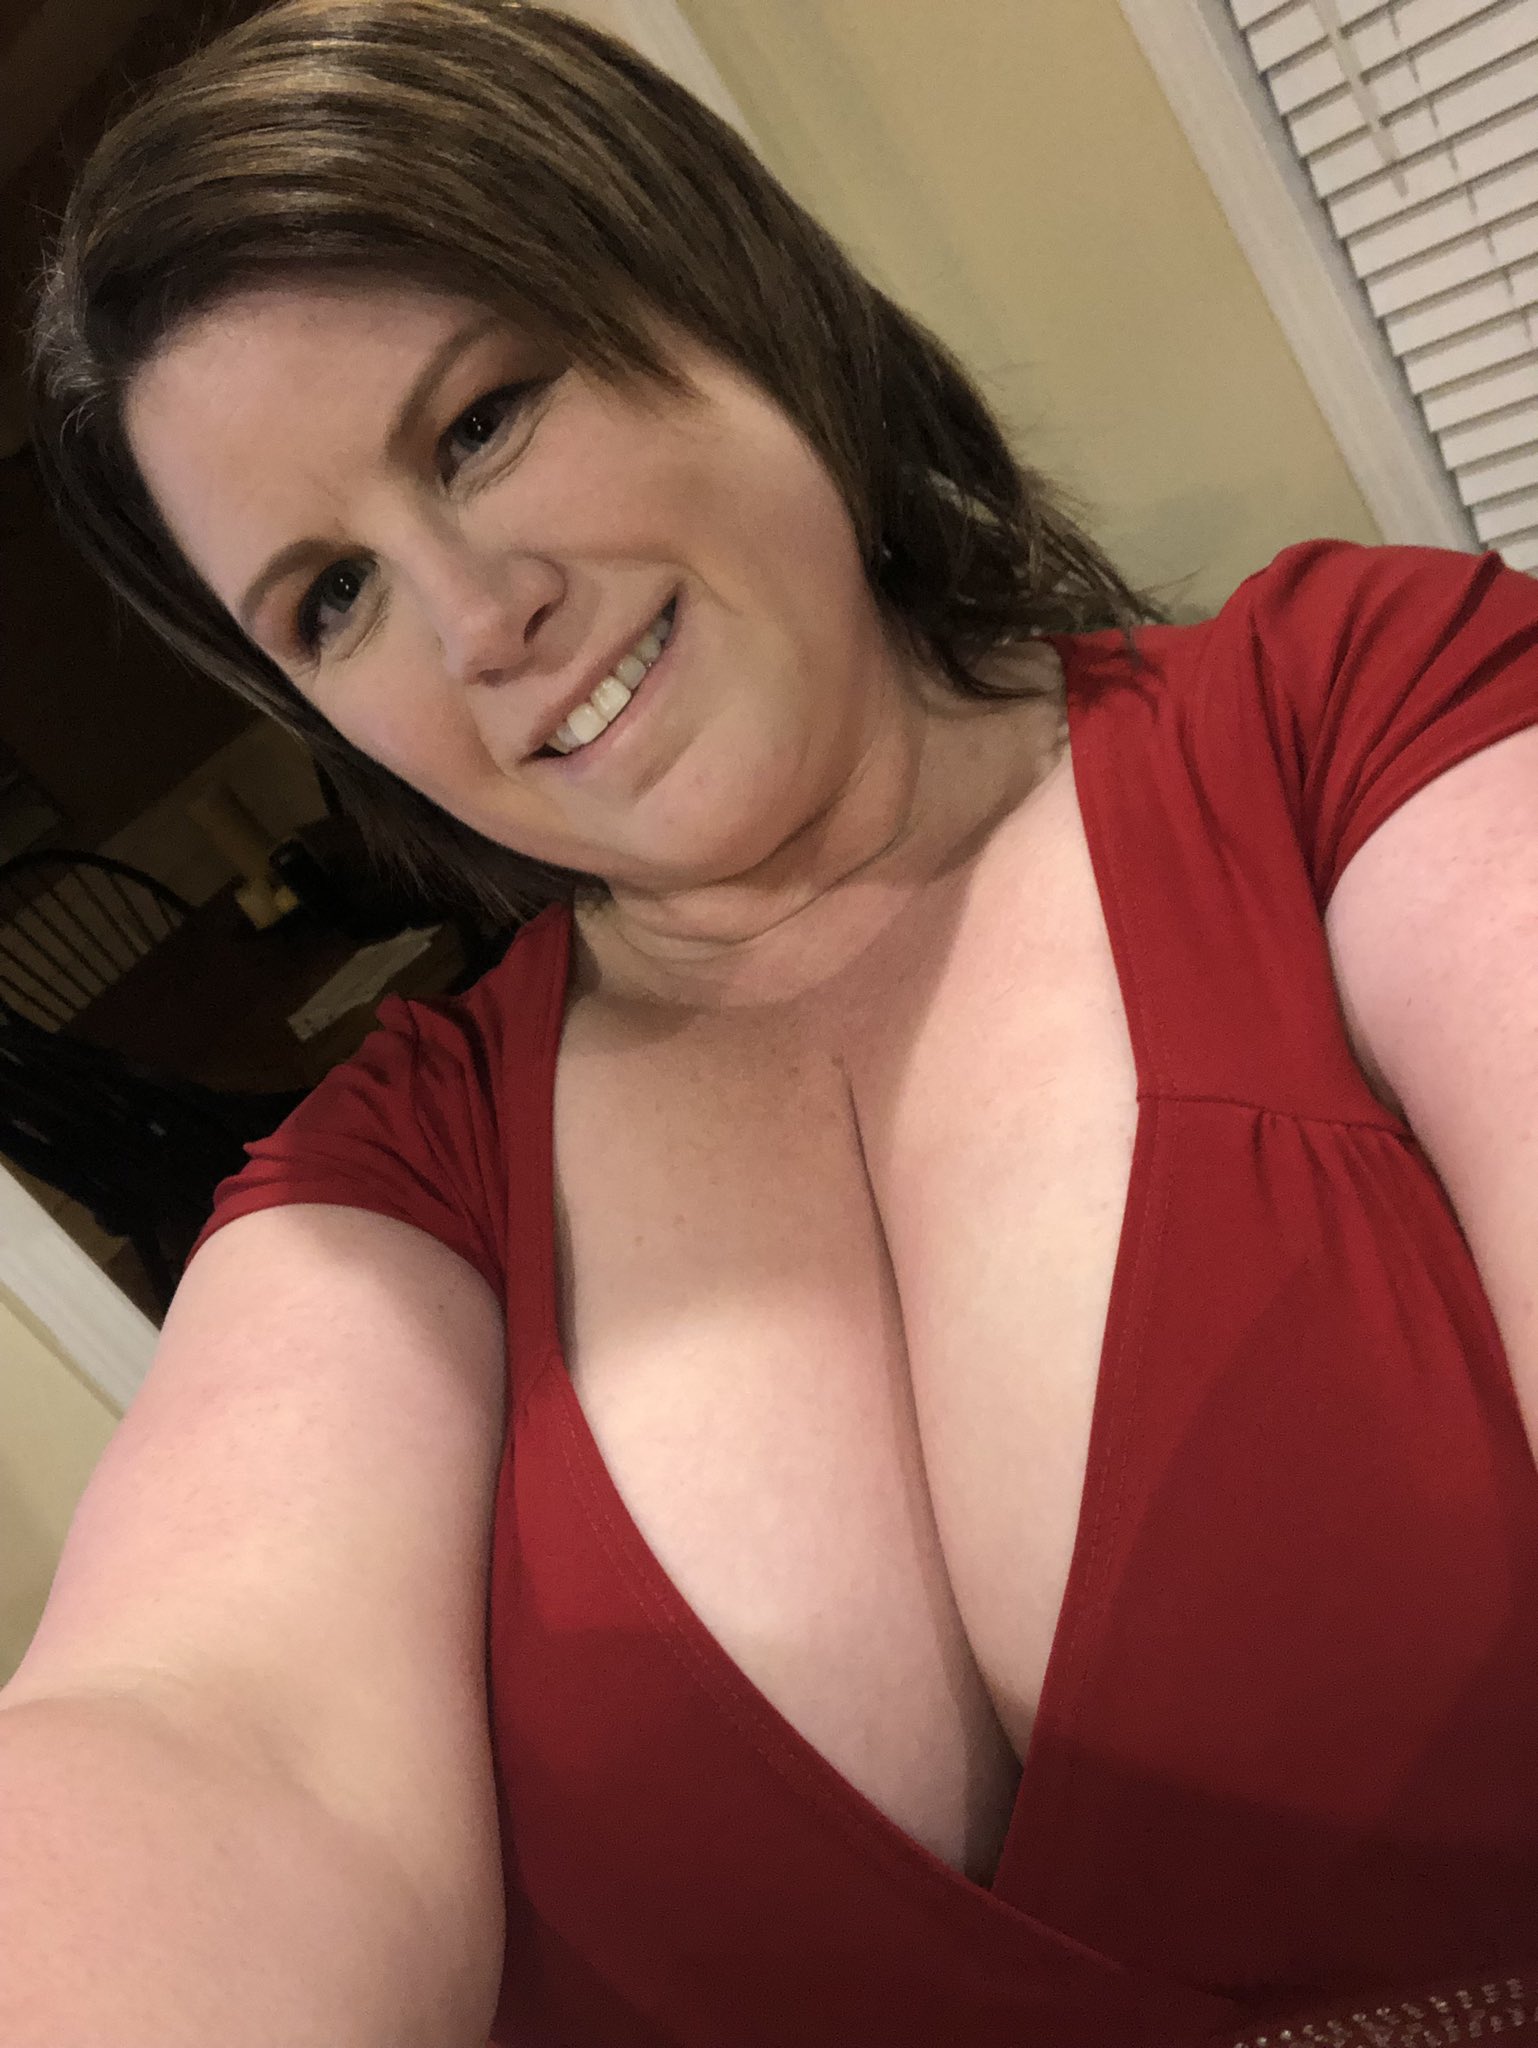 Just thought I would show some #cleavage and my #bignaturals 😁#bigboobs https://t.co/Ozg9RWg1gW